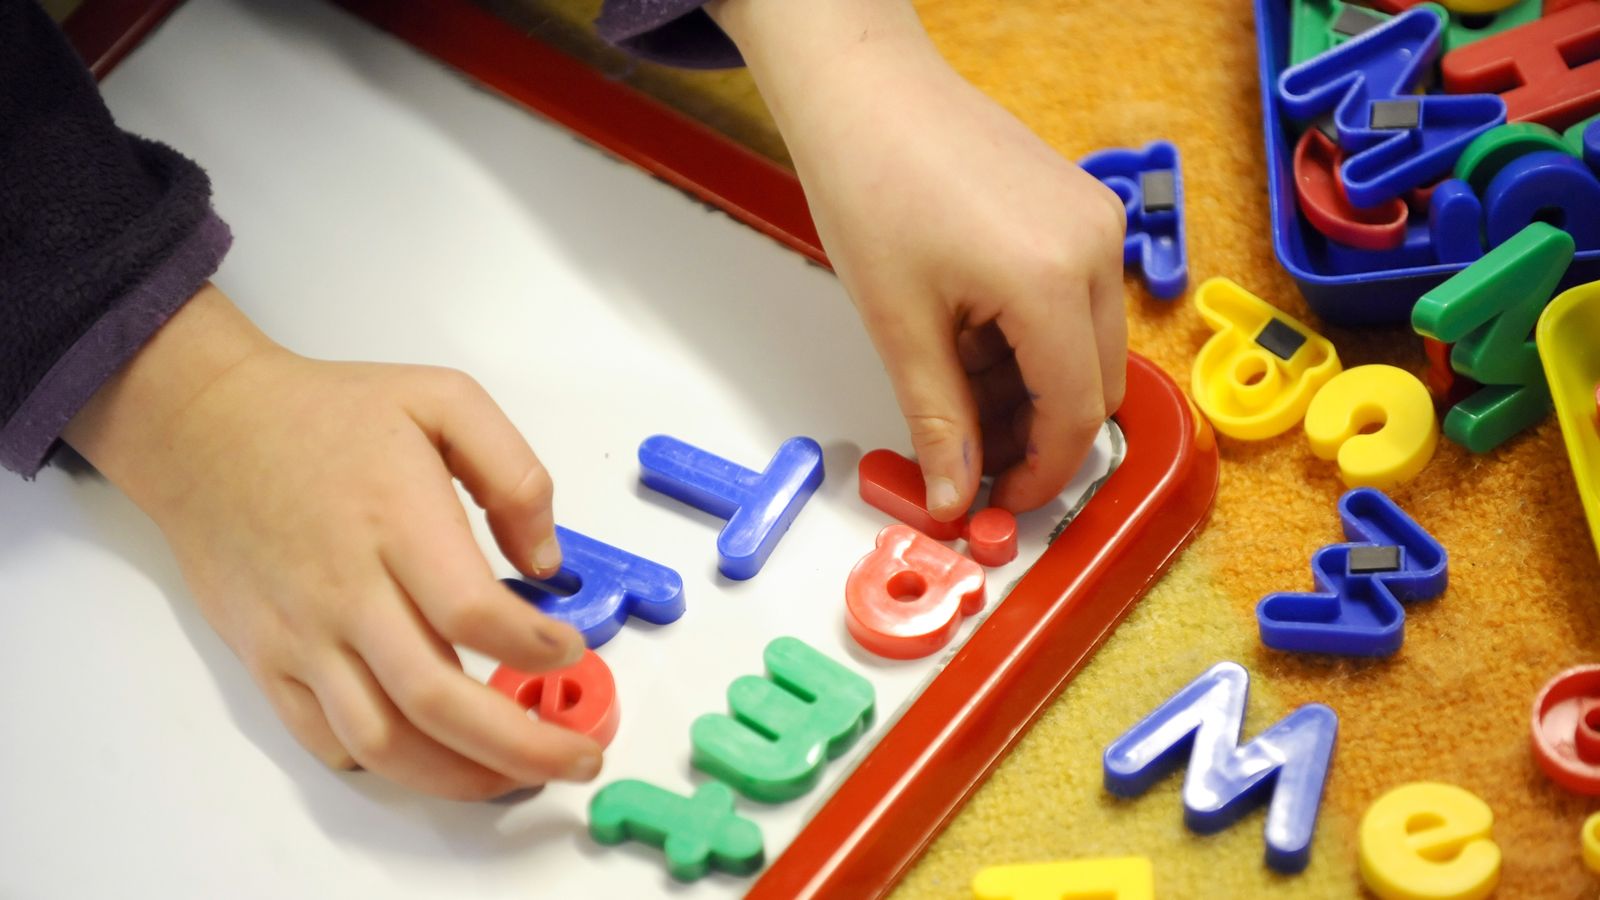 Nationwide childcare shortage means disadvantaged children missing out - but costs continue to rise